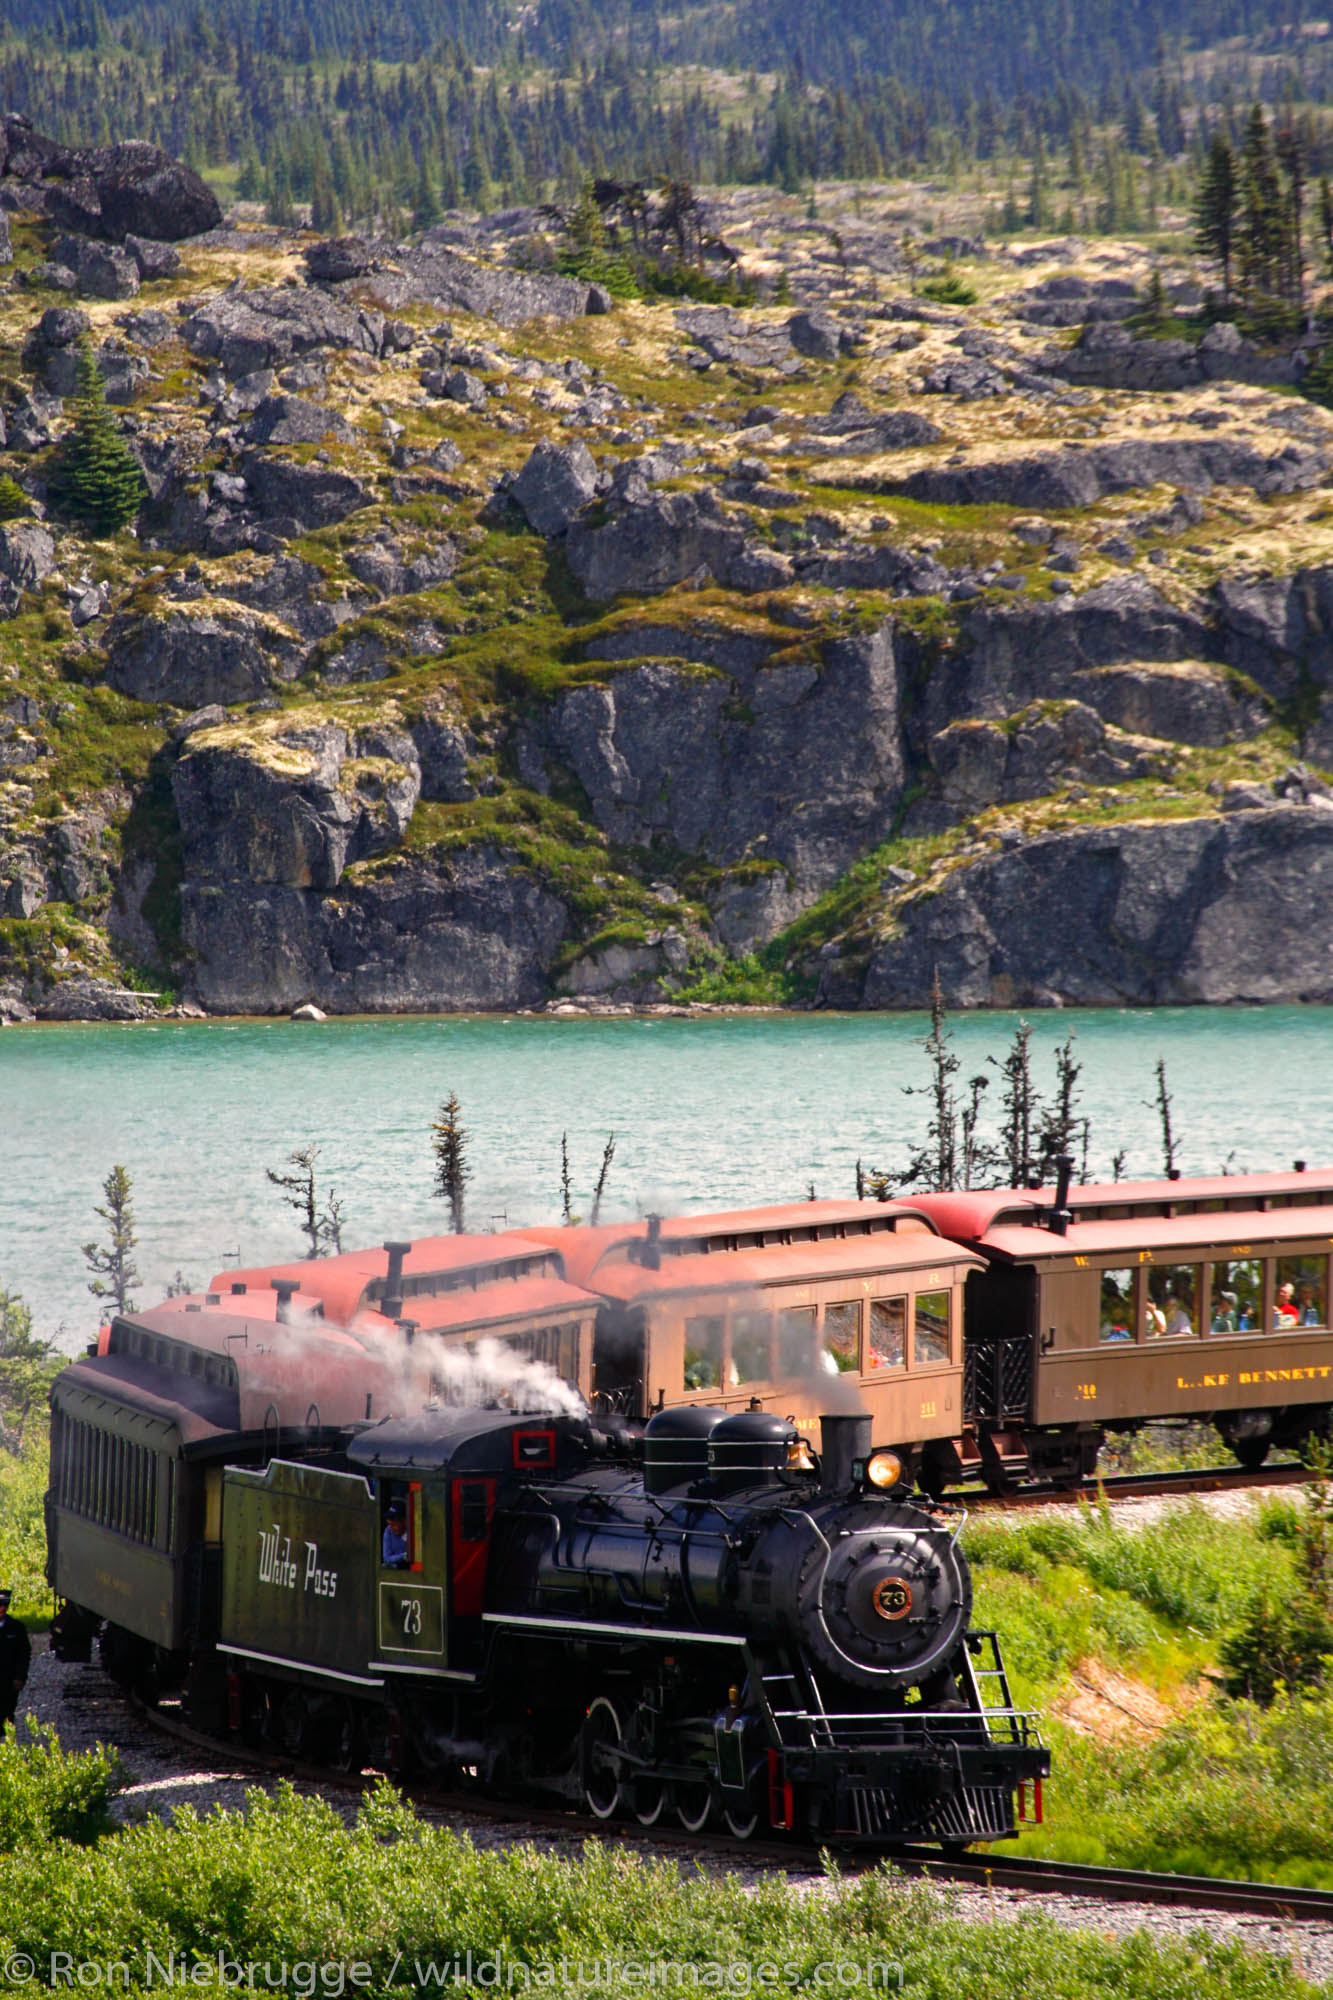 The historic steam engine number 73 of the White Pass and Yukon Route railroad passing through White Pass, British Columbia...